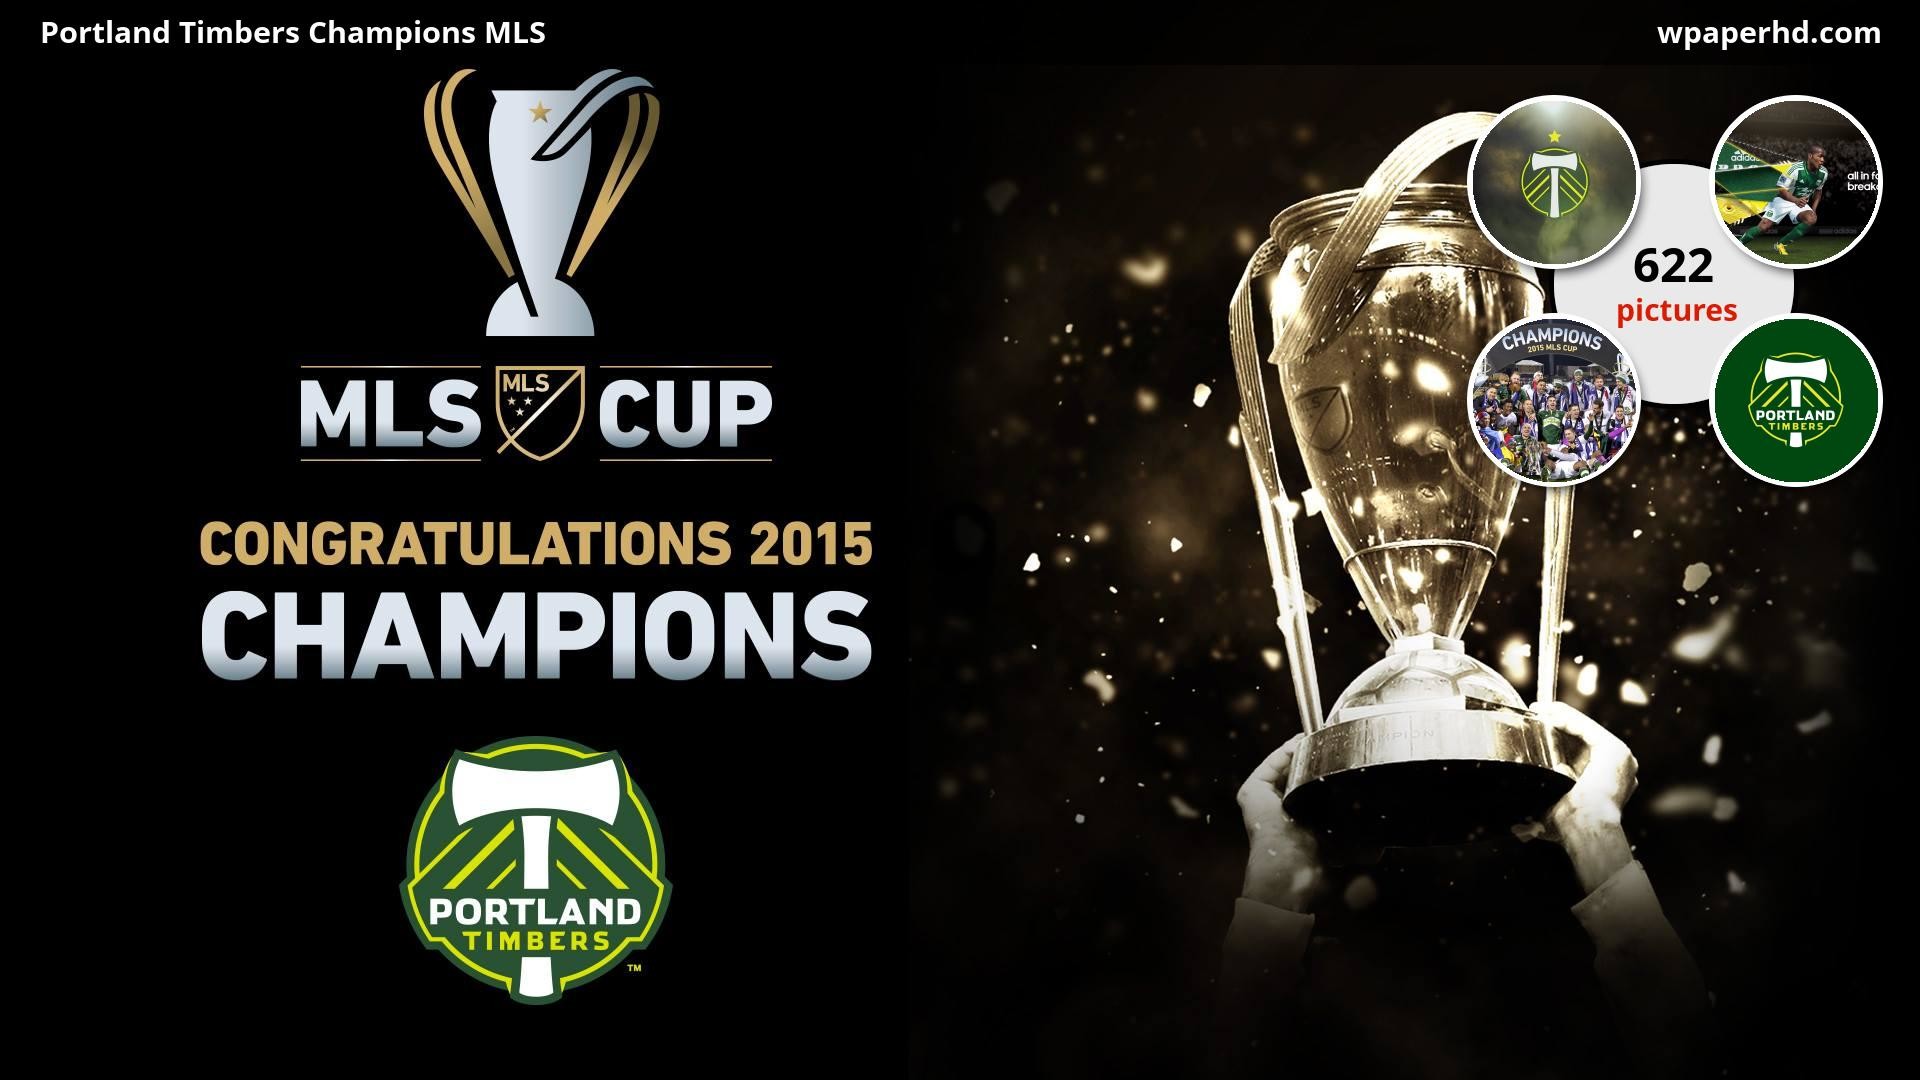 1920x1080 You are on page with Portland Timbers Champions MLS wallpaper, where you  can download this picture in Original size and ...